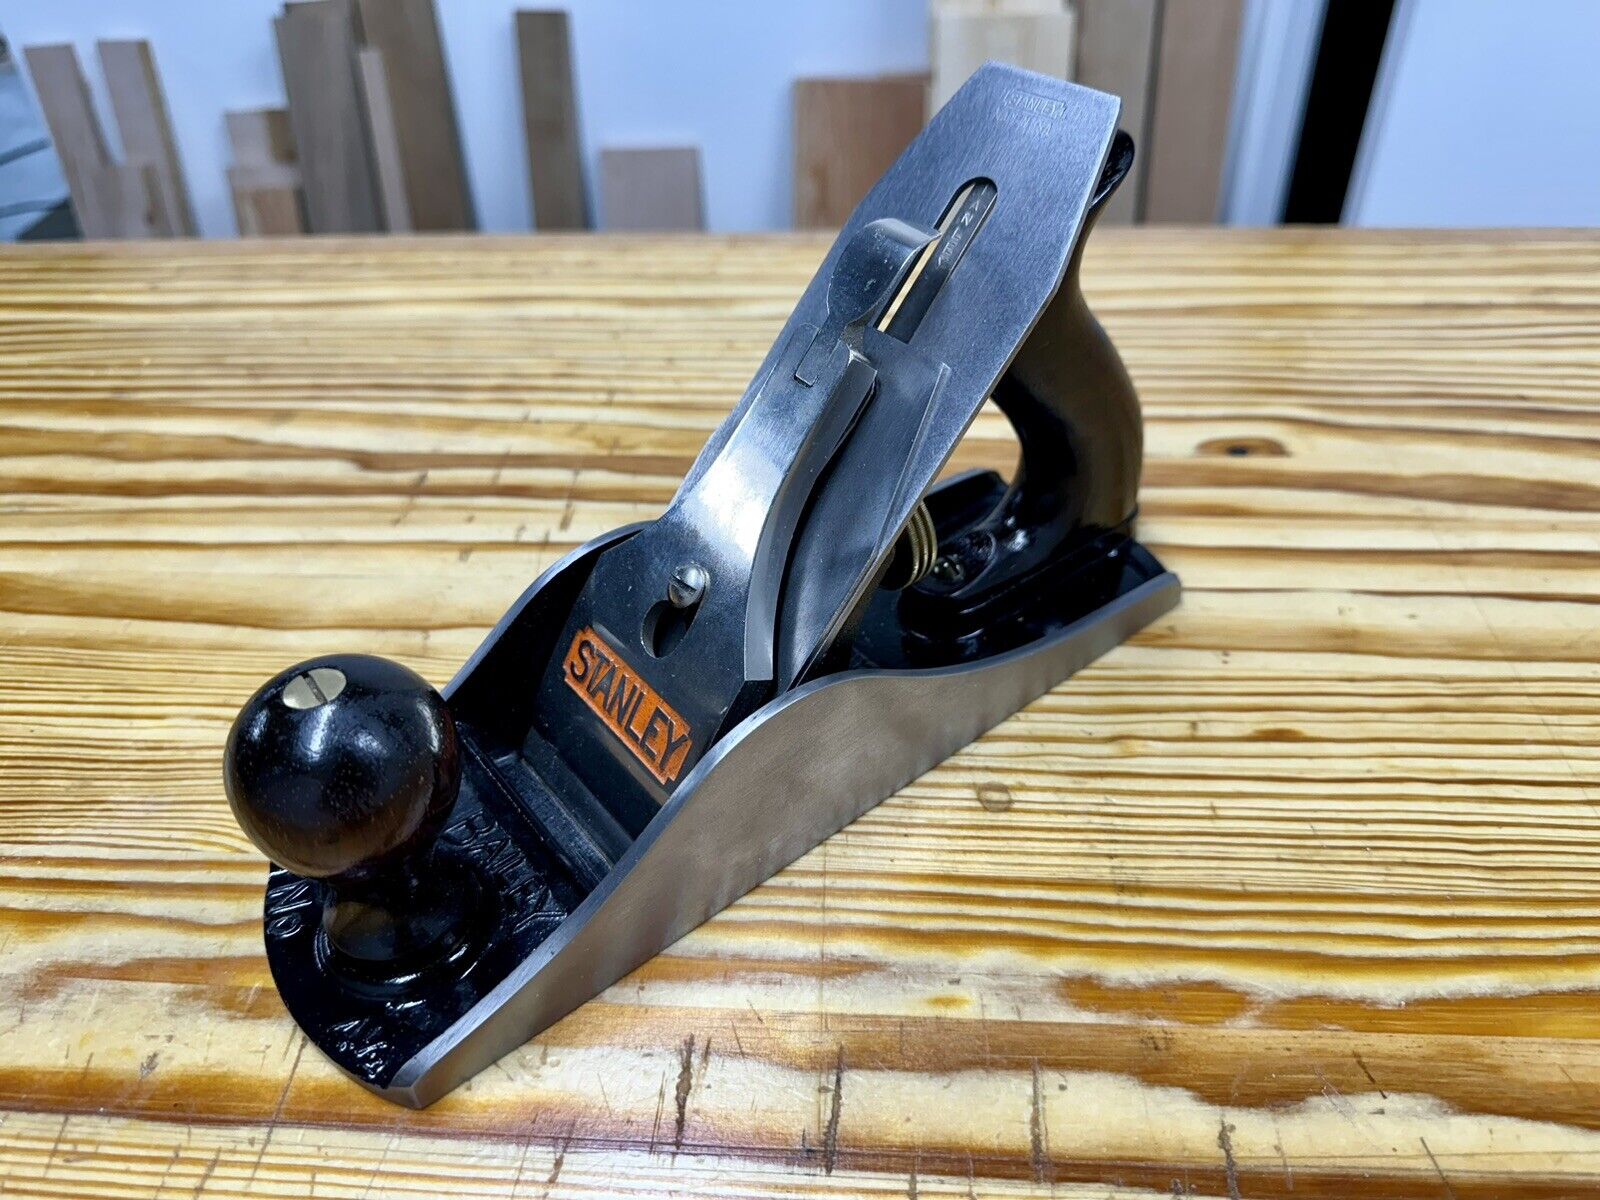 Vintage Stanley Bailey No. 4-1/2 Type 19 Smoothing Plane, Sharp & Ready To Work.